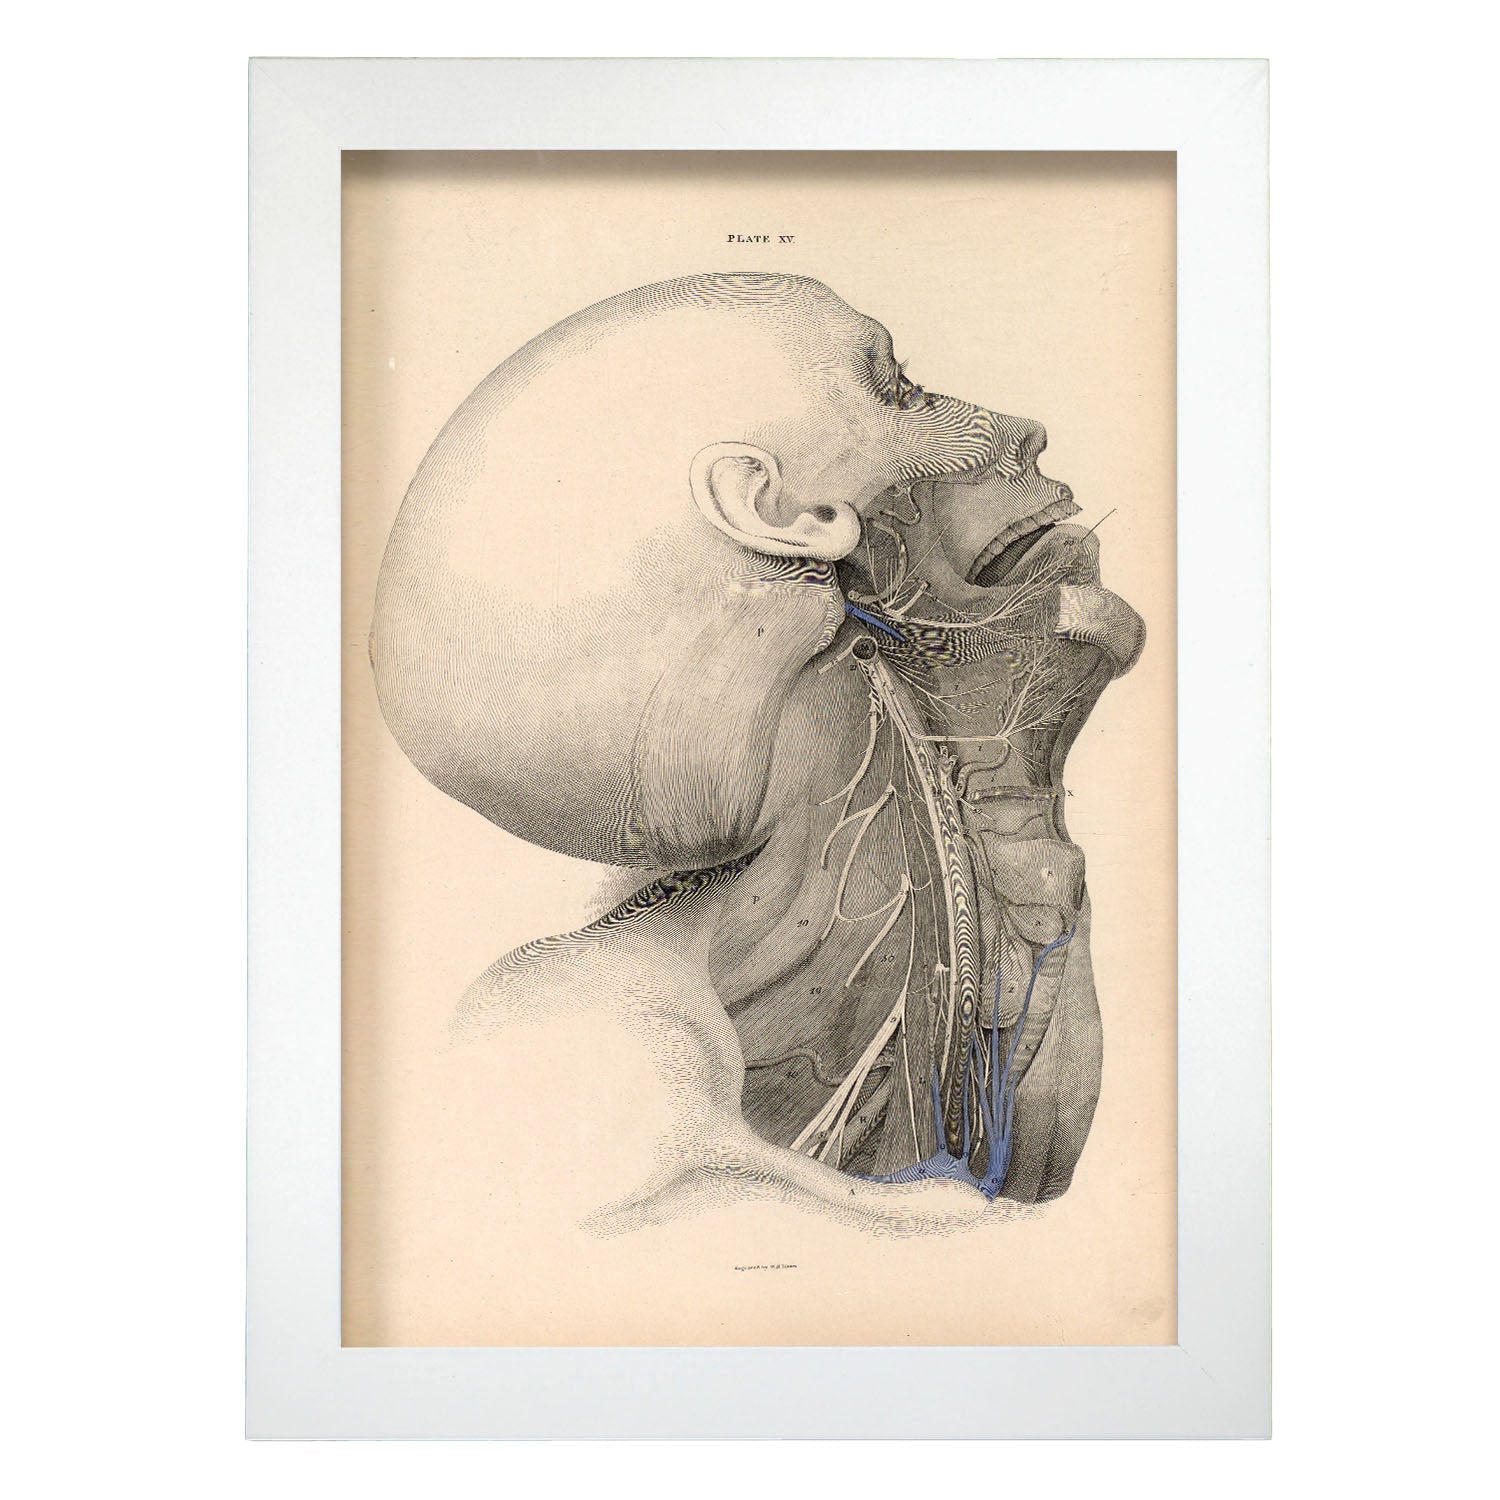 Dissection of the face and neck-Artwork-Nacnic-A4-Marco Blanco-Nacnic Estudio SL